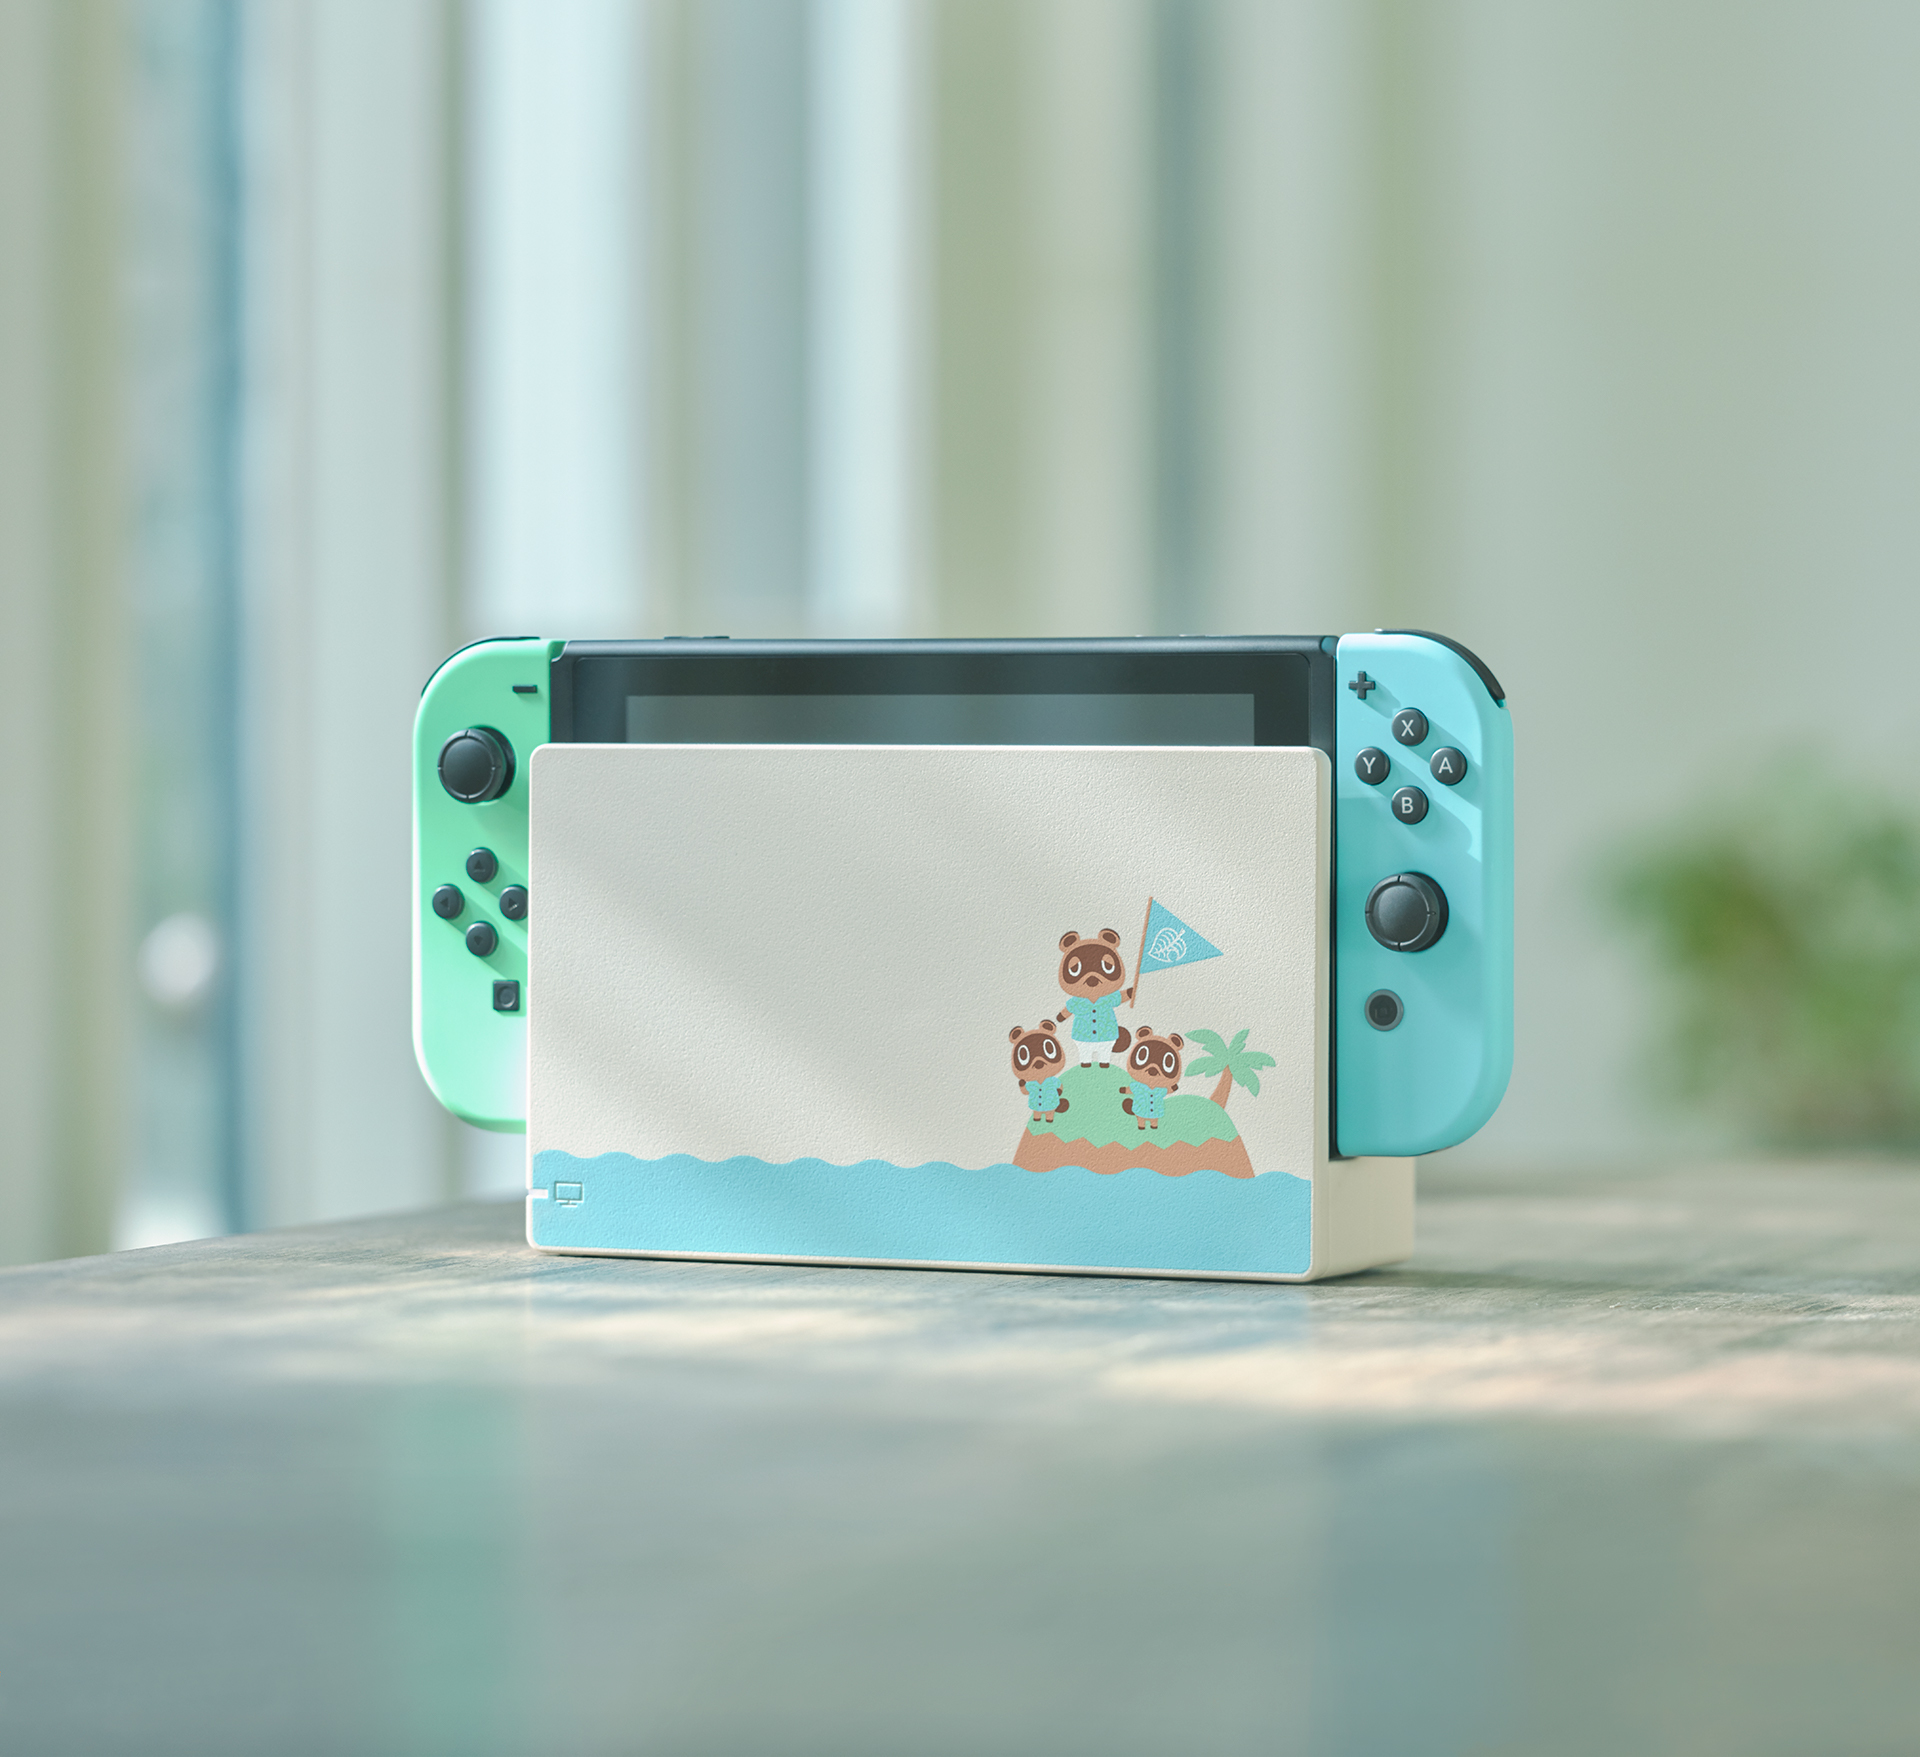 Animal crossing new horizons switch console ed limitee 1 1 3